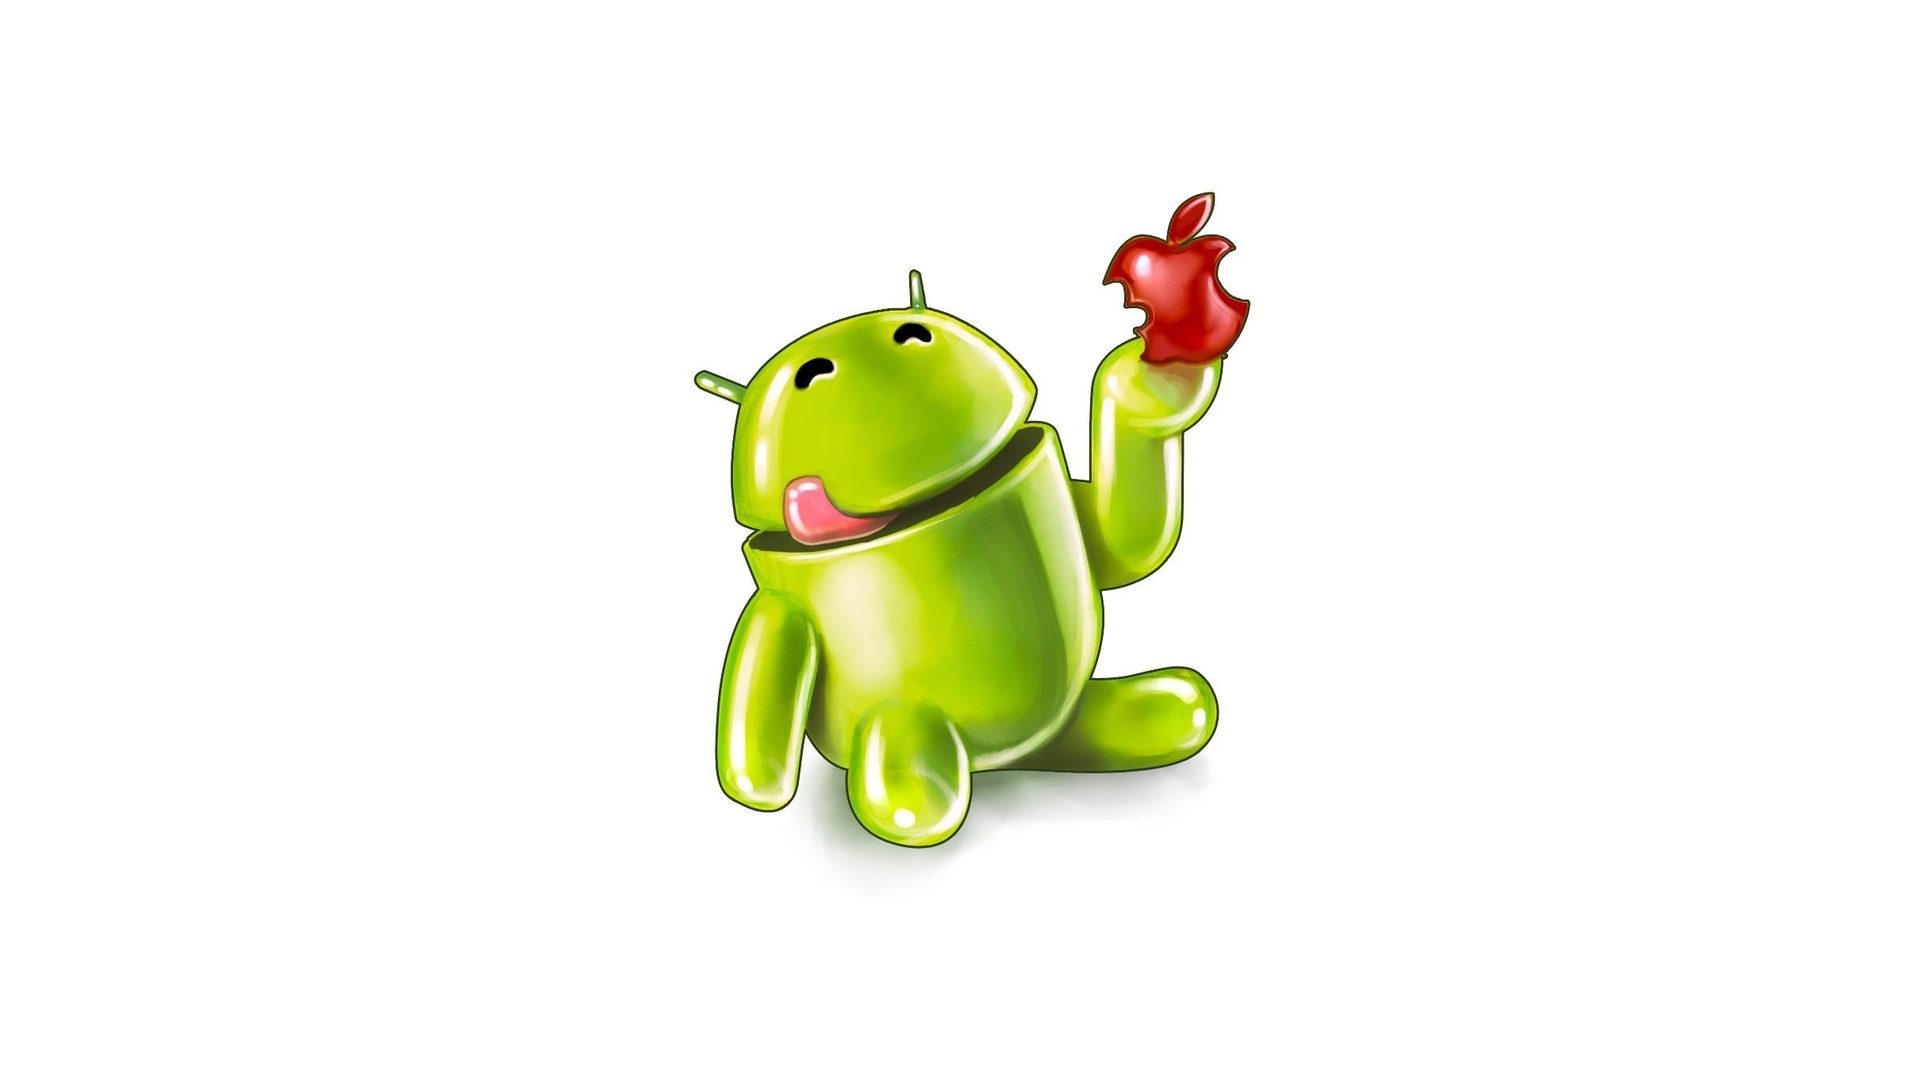 Android Eating Apple for 1920 x 1080 HDTV 1080p resolution